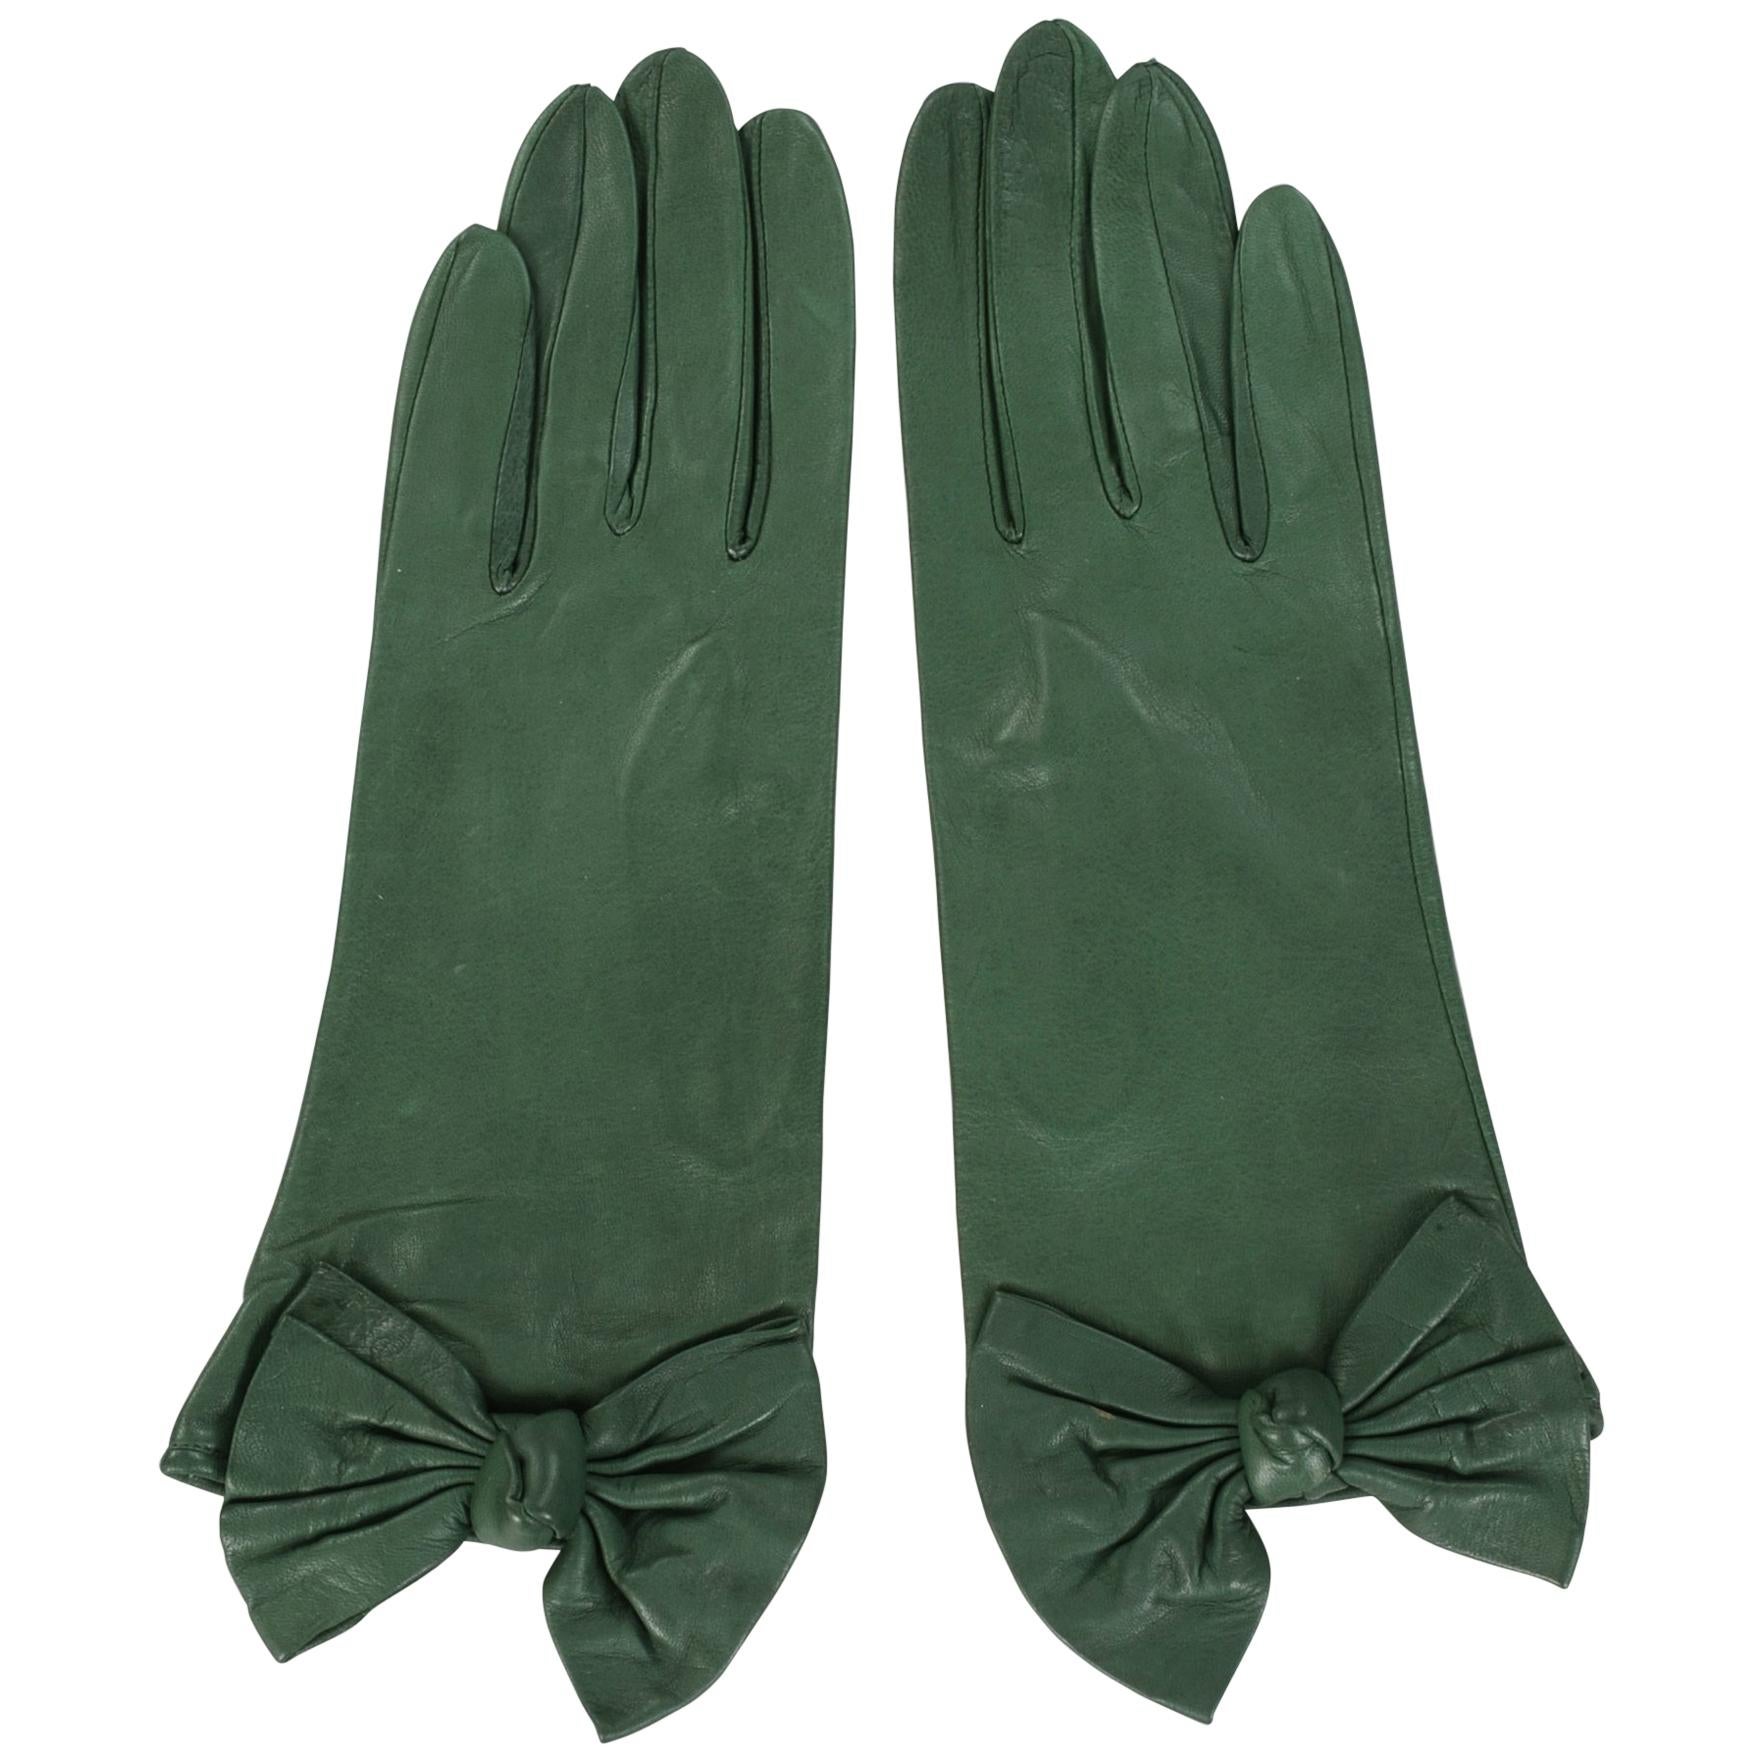 Carlos Falchi British Racing Green Leather Gloves with Bow Decoration Never Worn